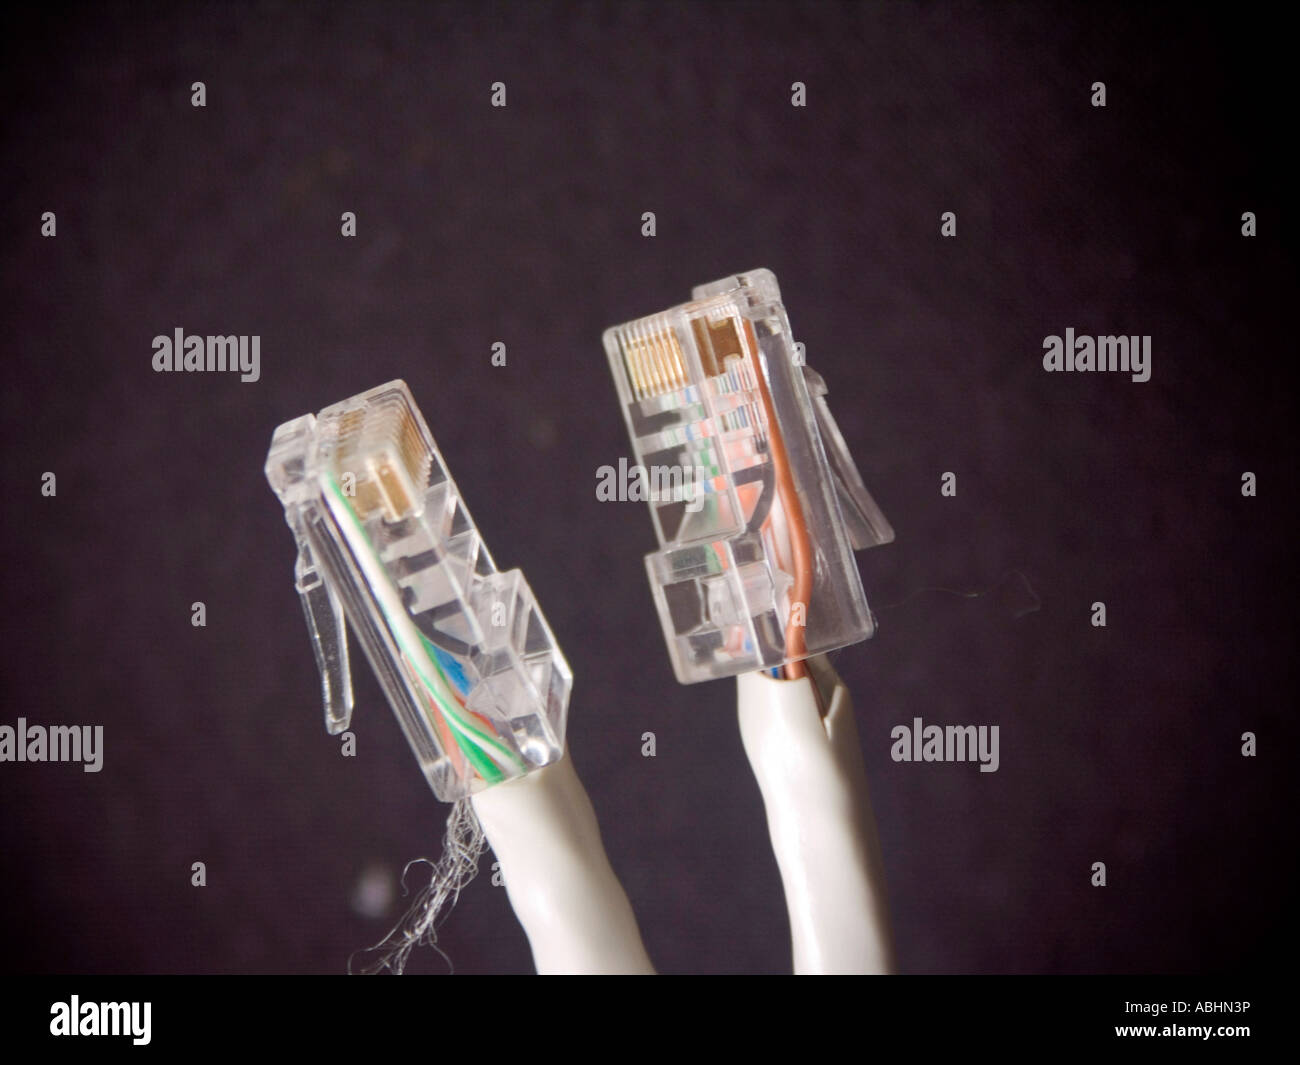 pc rj 45 plug cable close up on a dark background Stock Photo